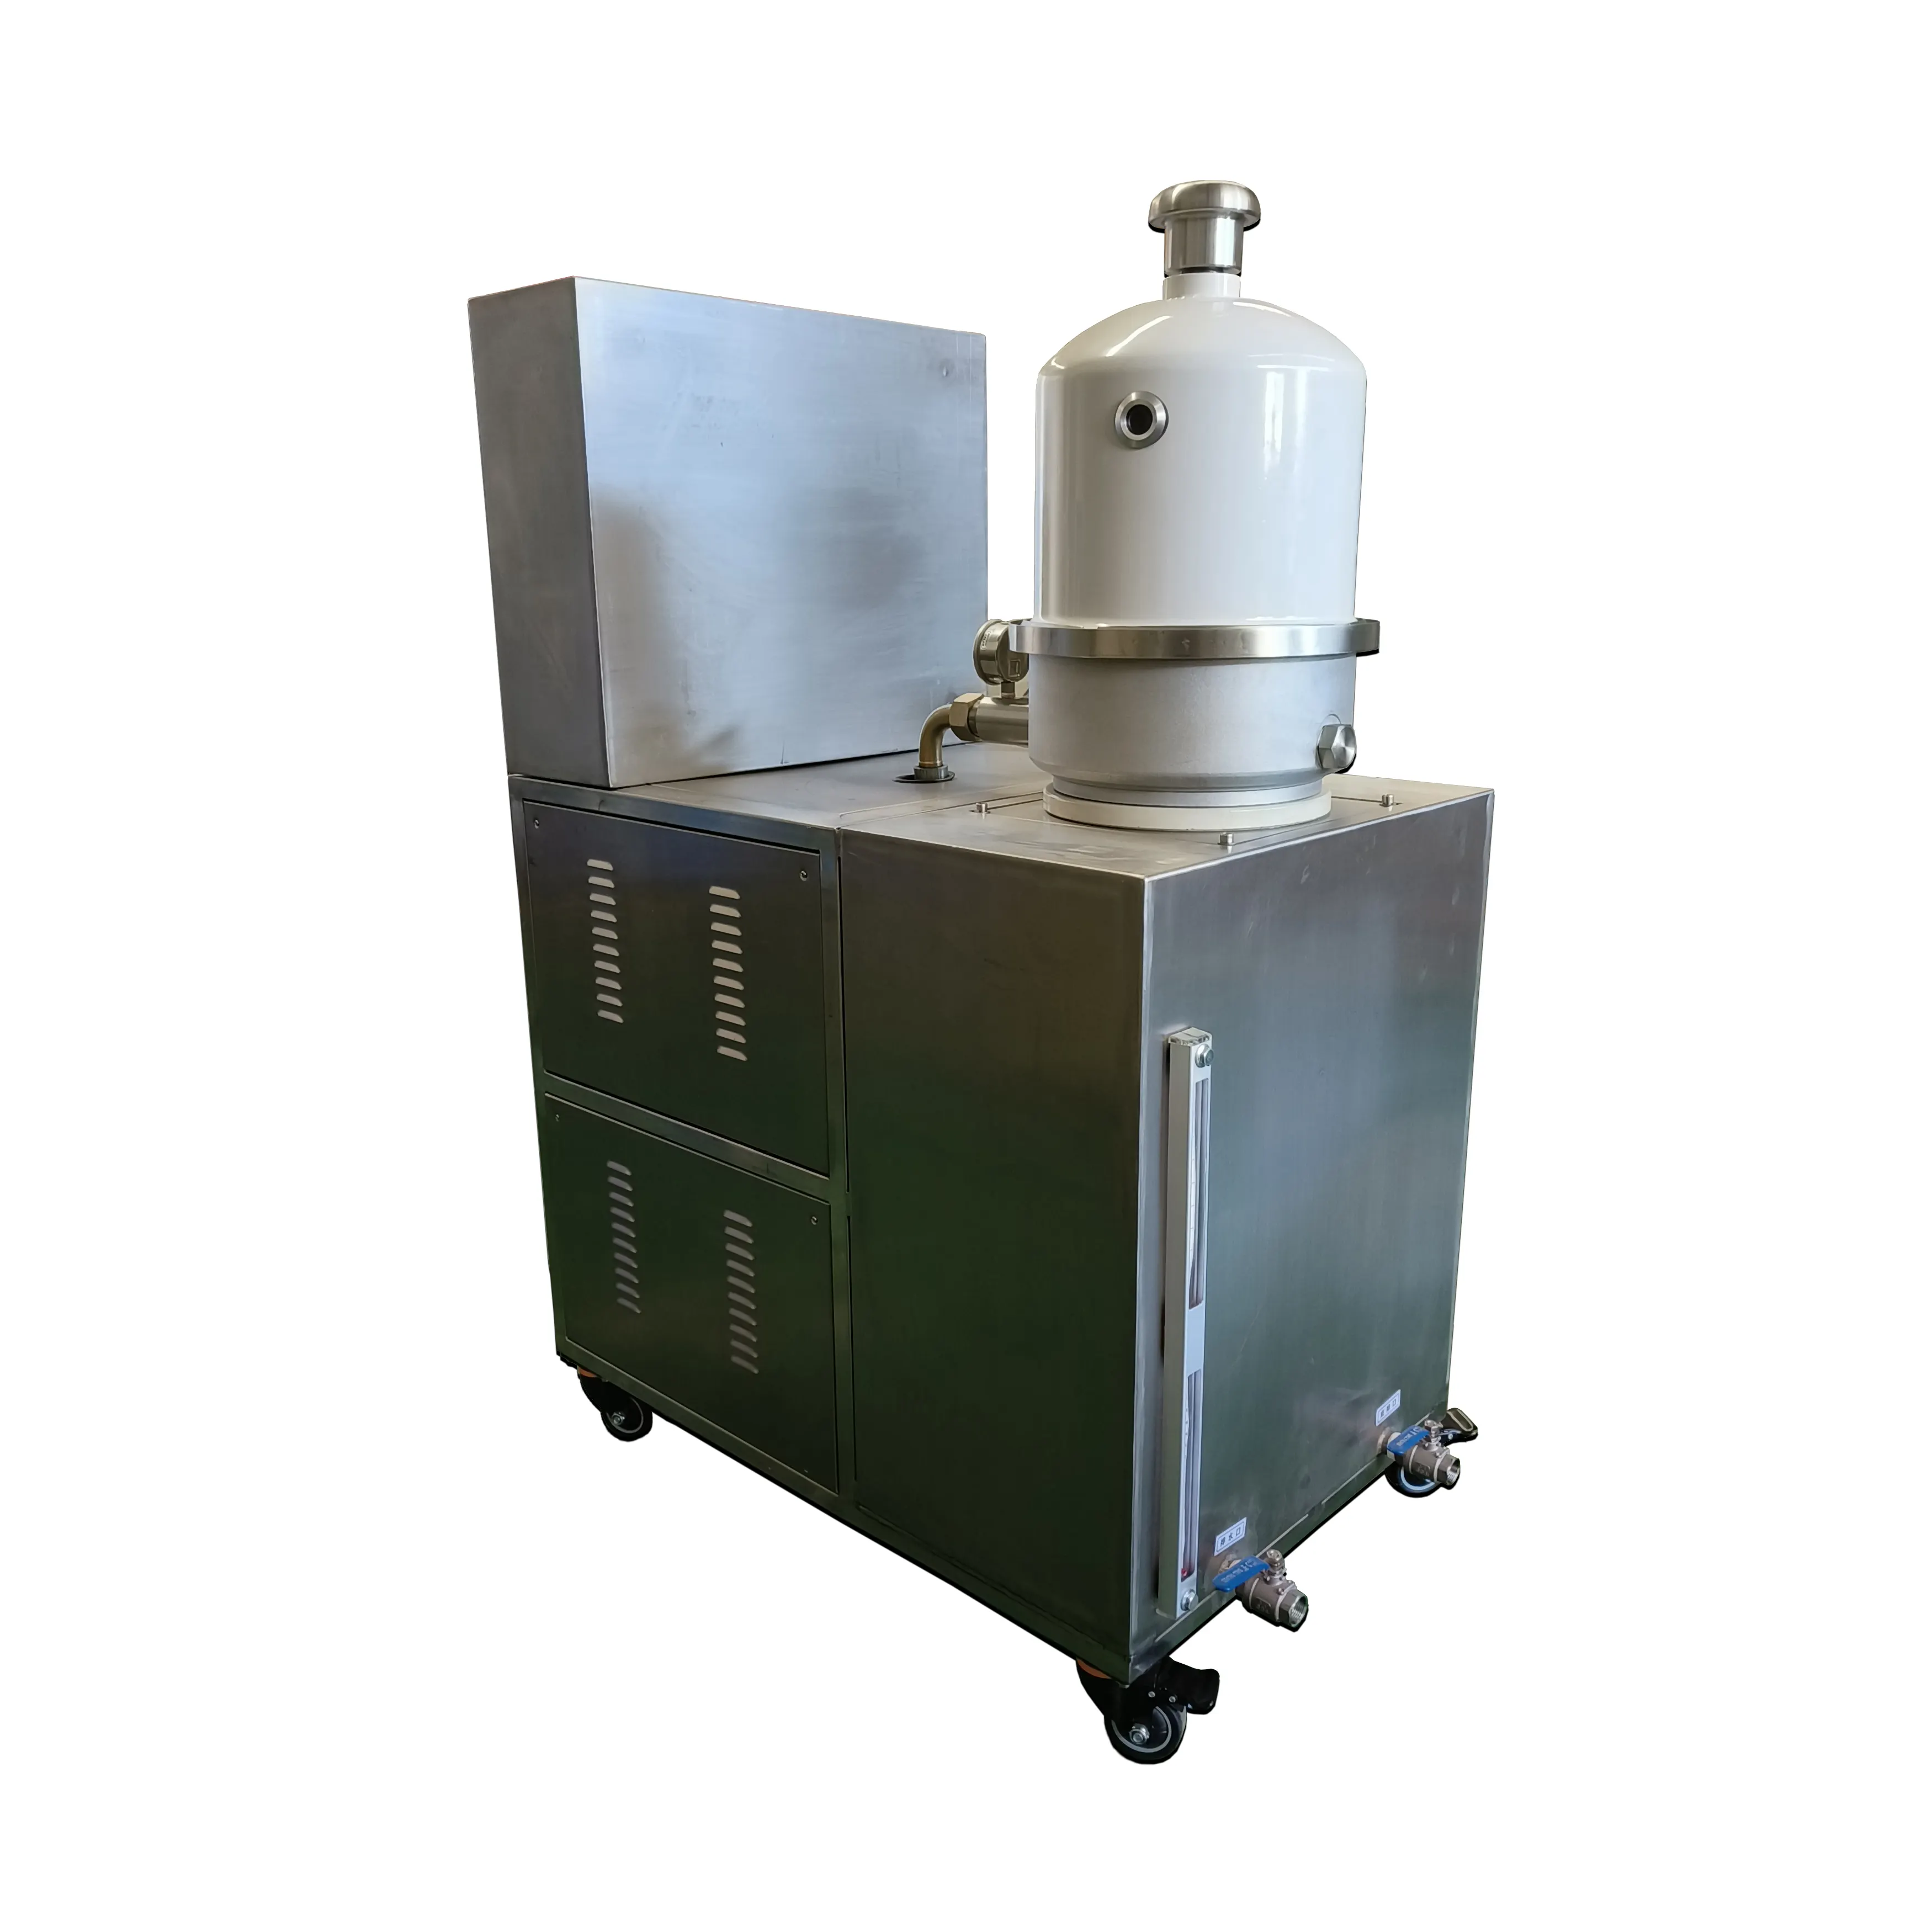 Oil purification machine for hydrulic oil